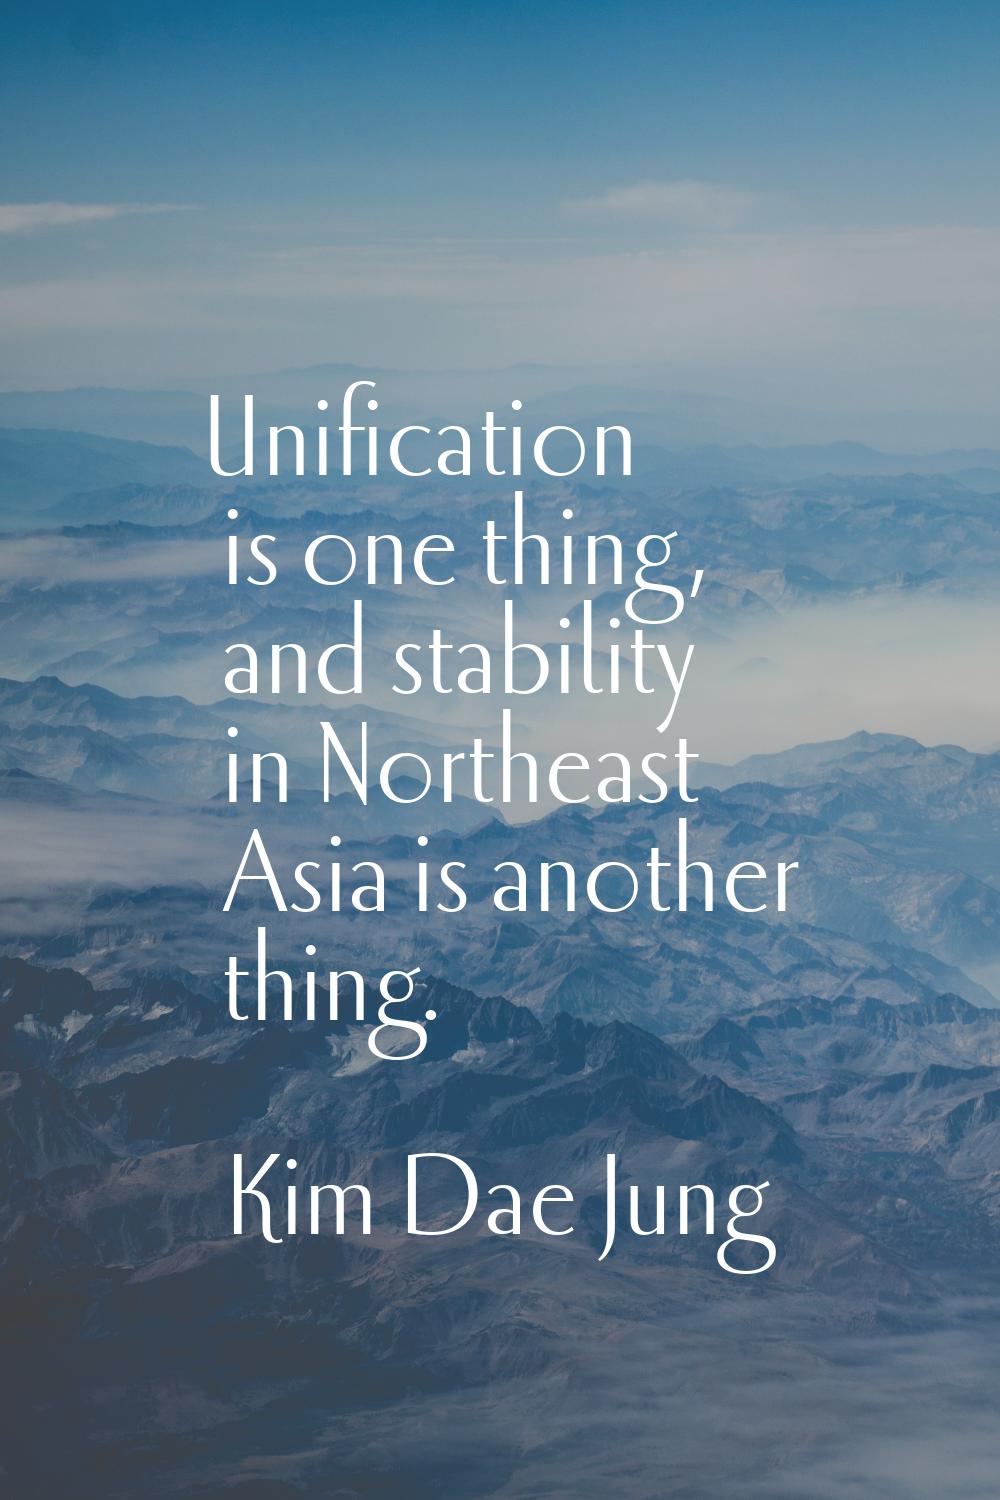 Unification is one thing, and stability in Northeast Asia is another thing.